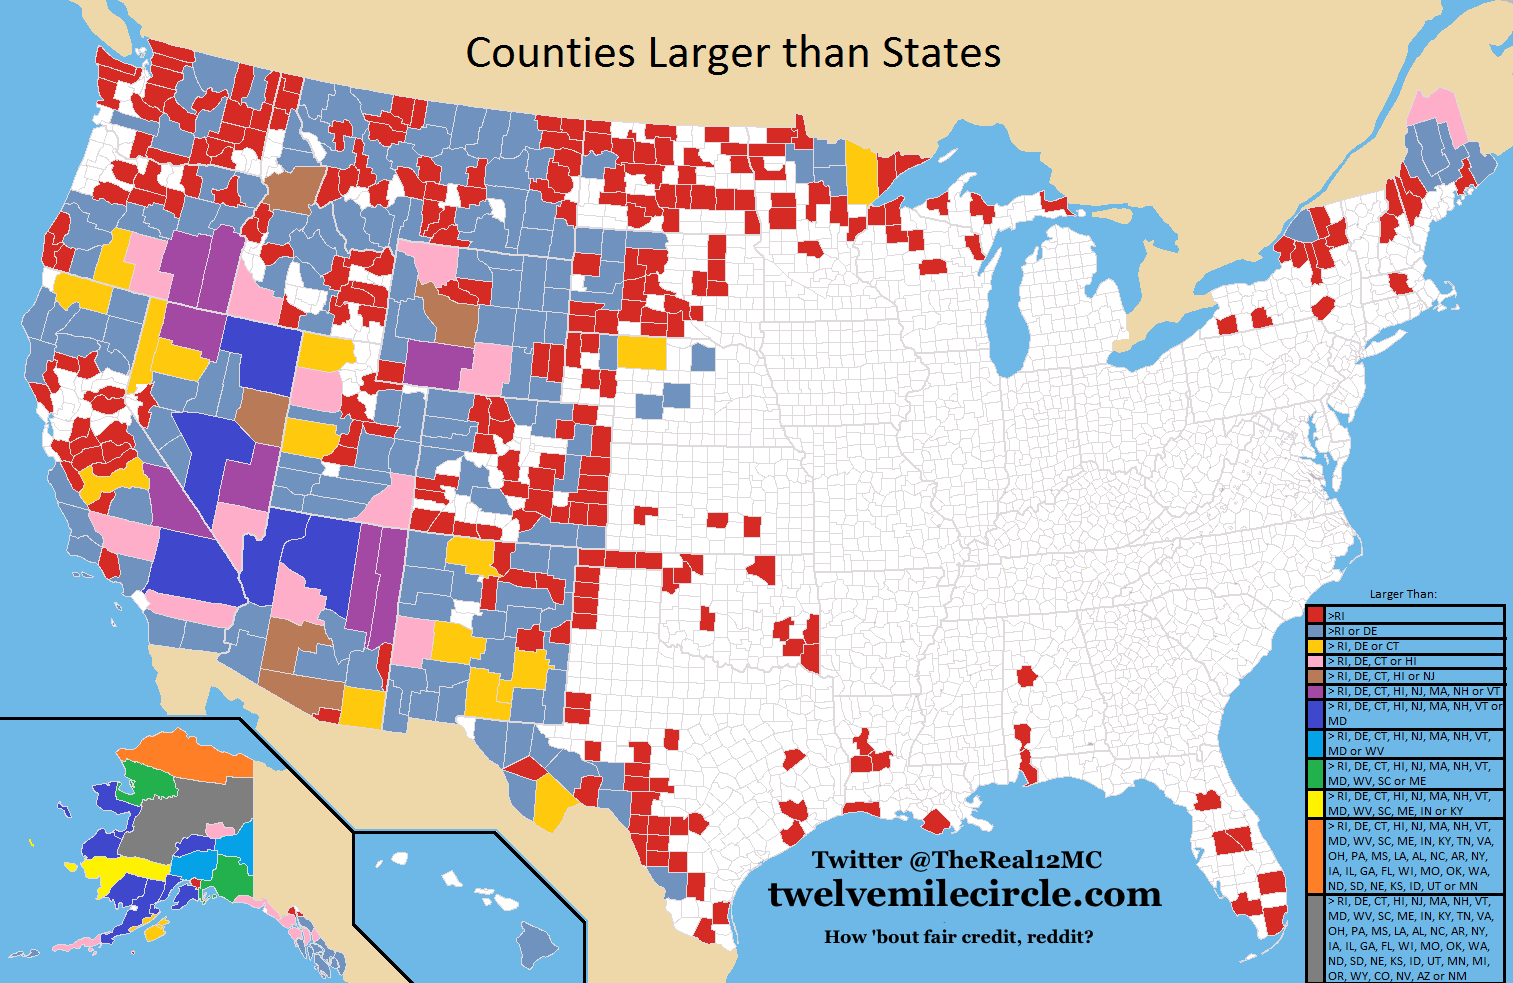 U.S. Counties Larger than States